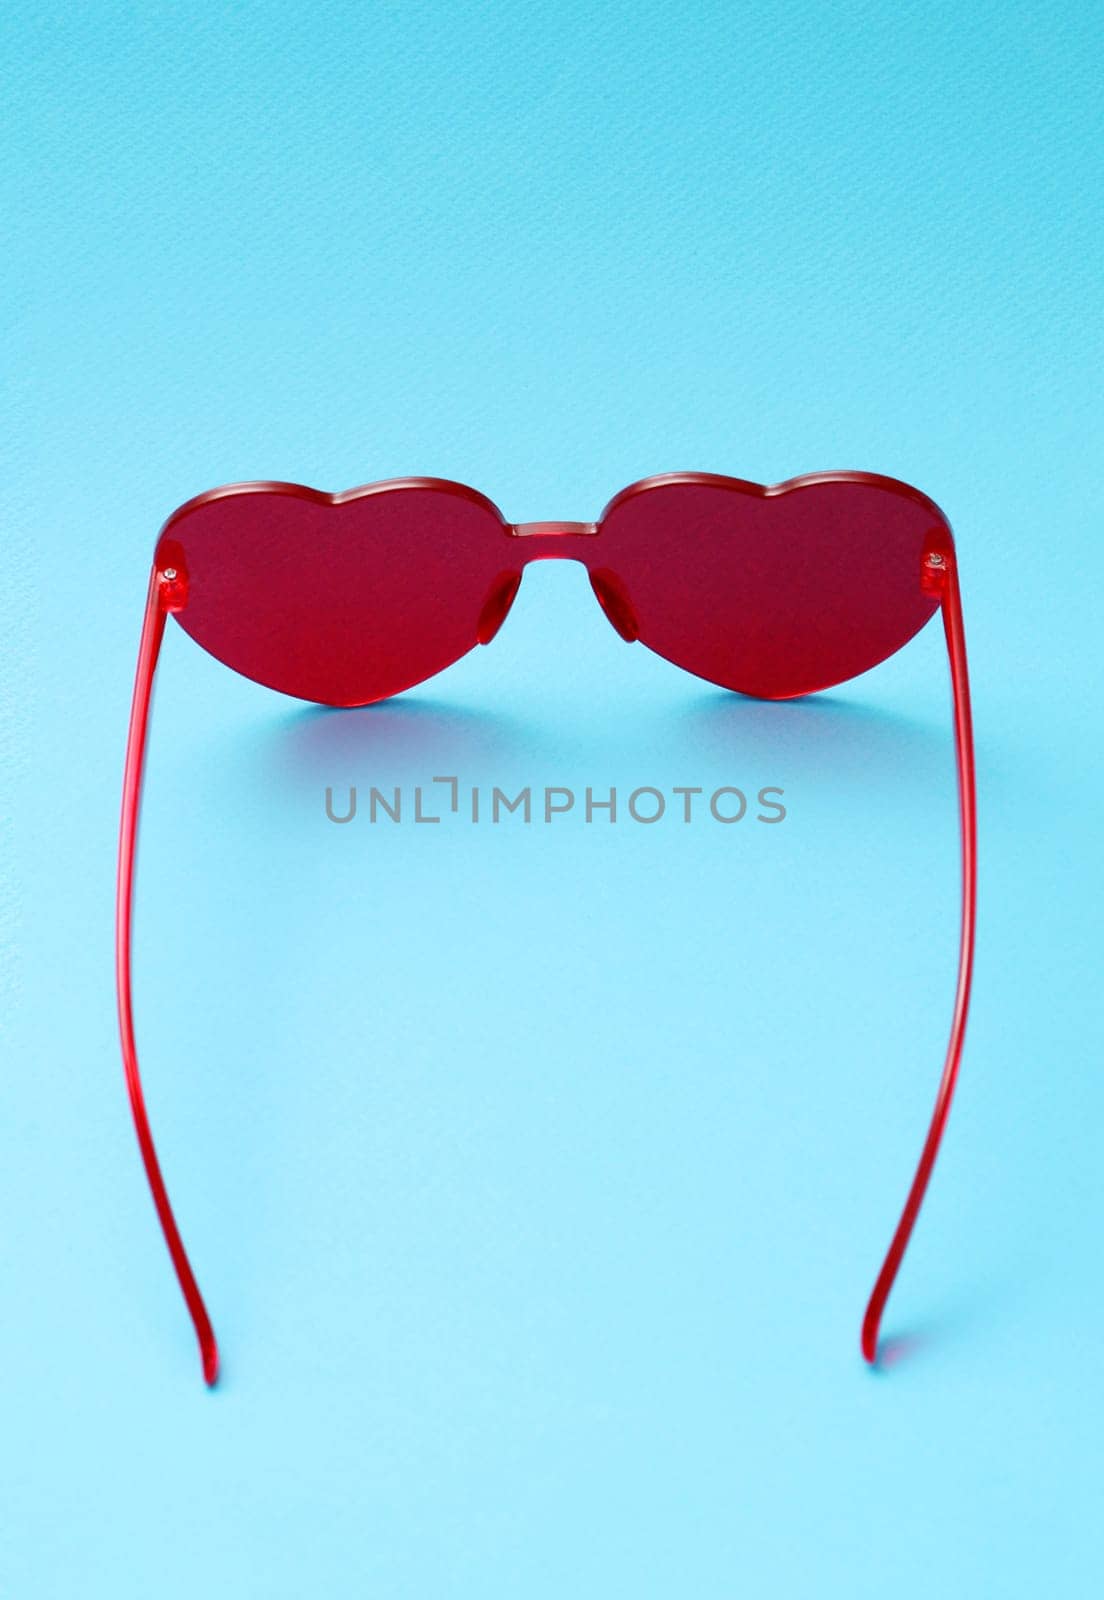 Vertical photo of red sunglasses on a blue background top view.